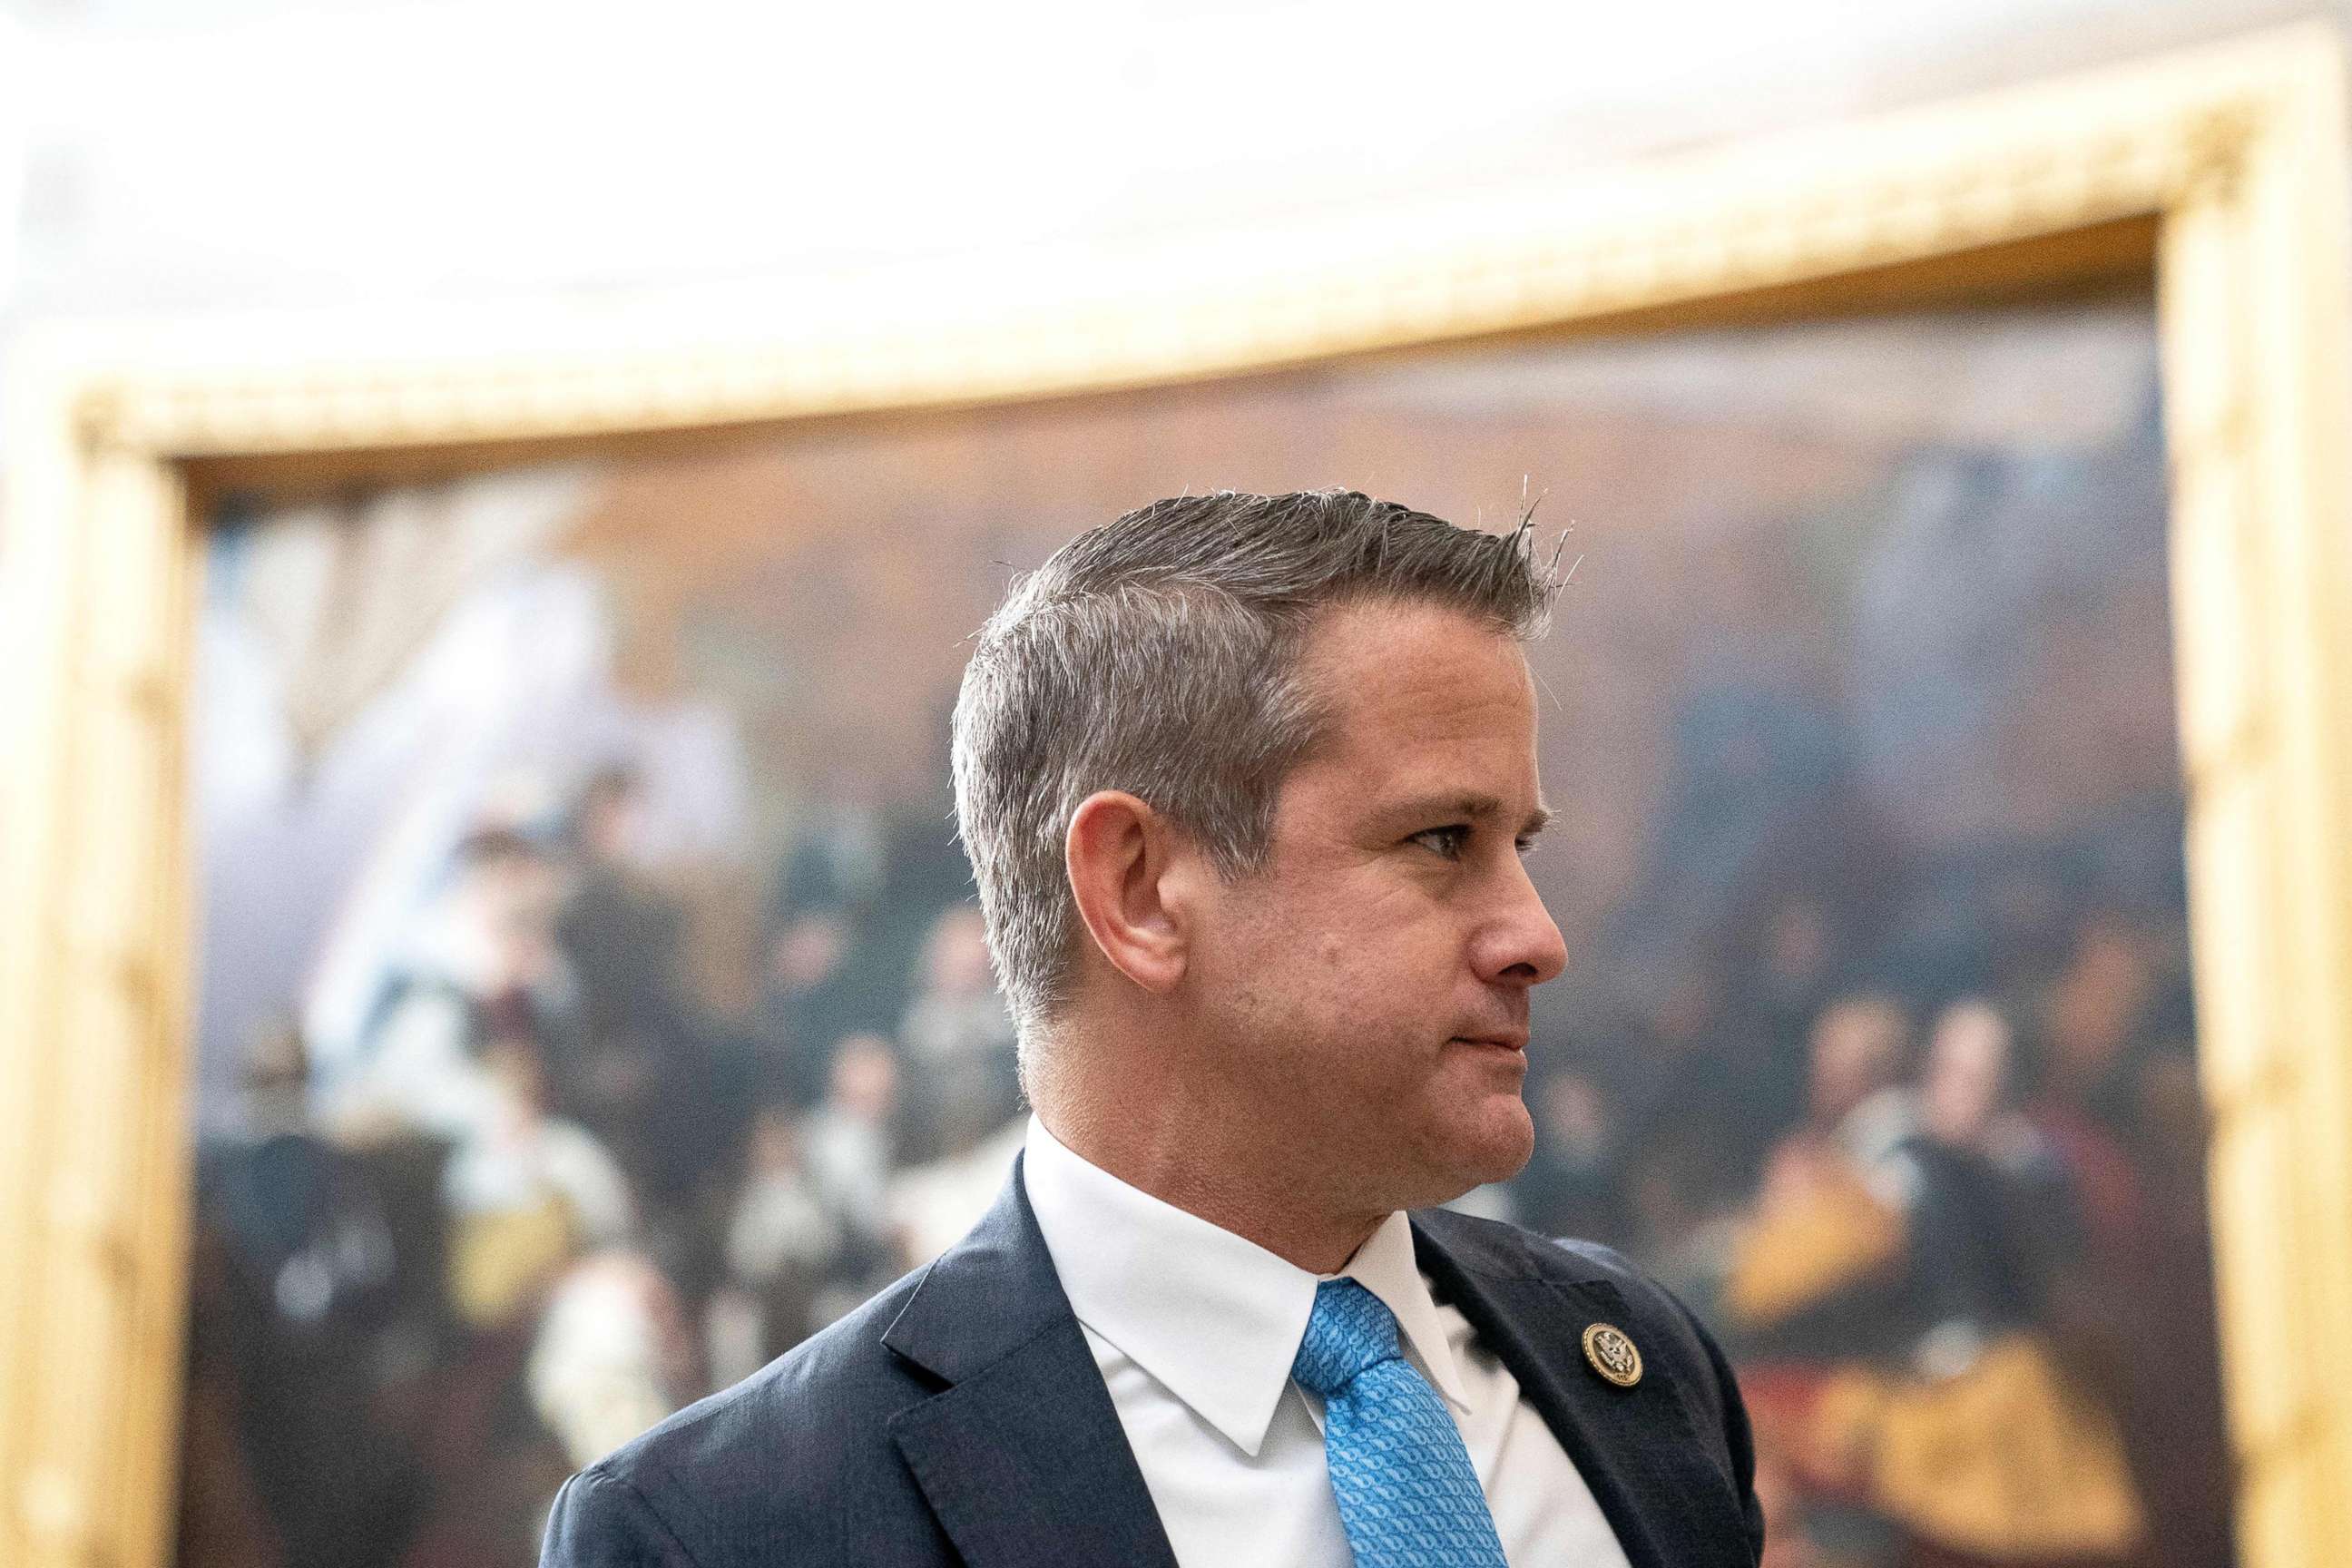 PHOTO: Rep. Adam Kinzinger speaks to members of the Ukrainian Parliament in the rotunda of the US Capitol in Washington on April 27, 2022.